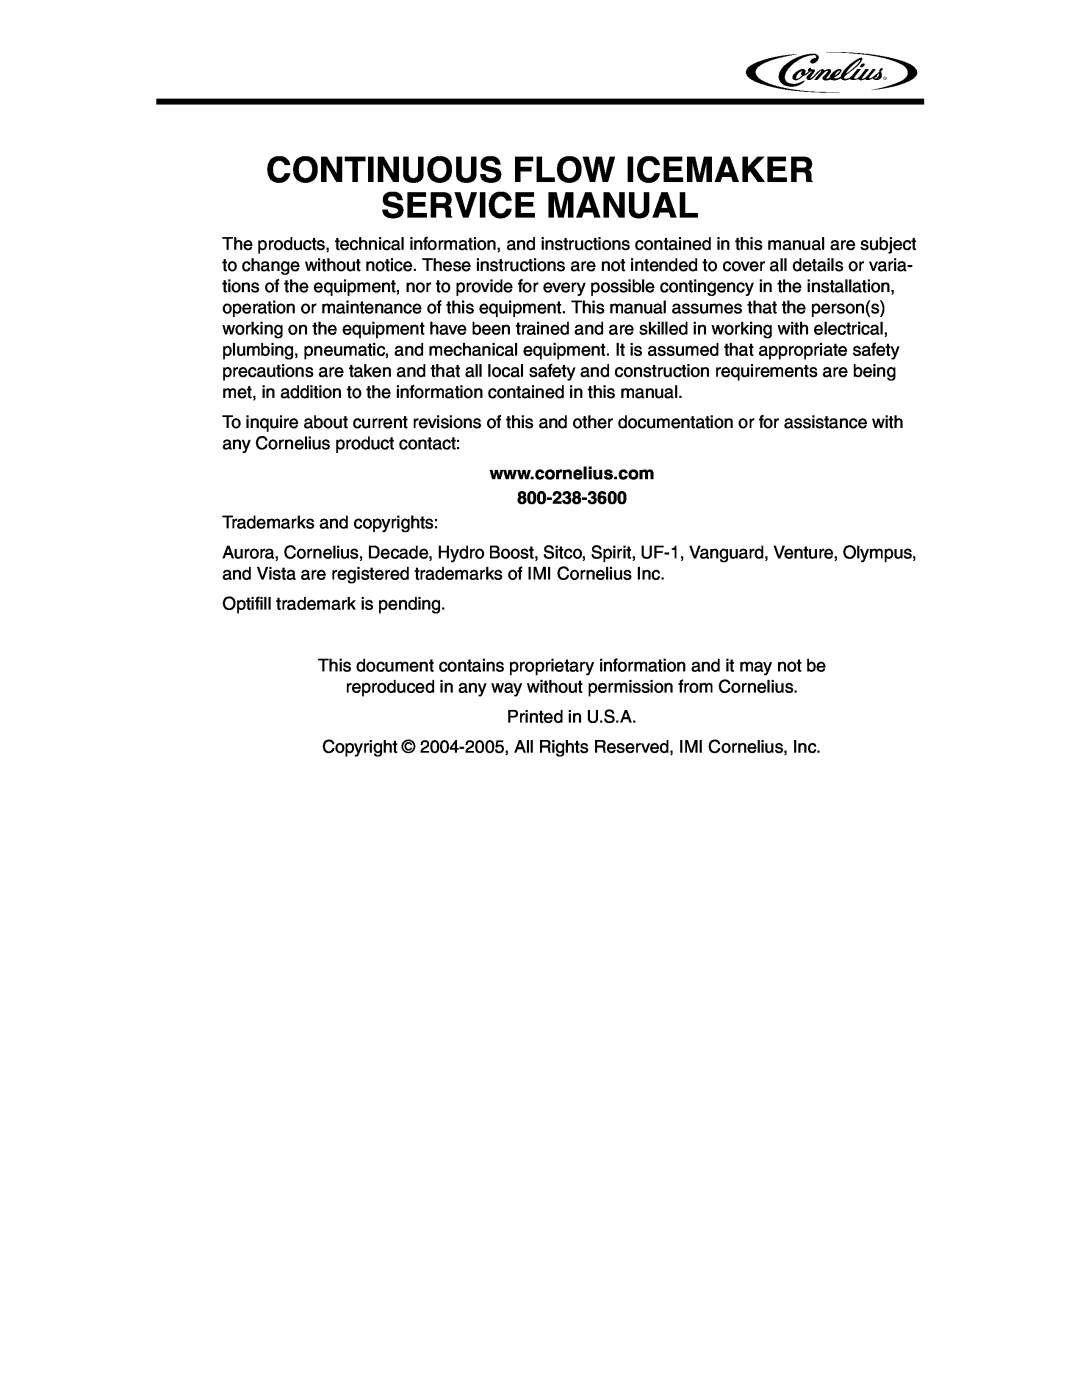 Cornelius 1000 - Series, 700 - Series, 2000 - Series, 500 - Series service manual Continuous Flow Icemaker Service Manual 